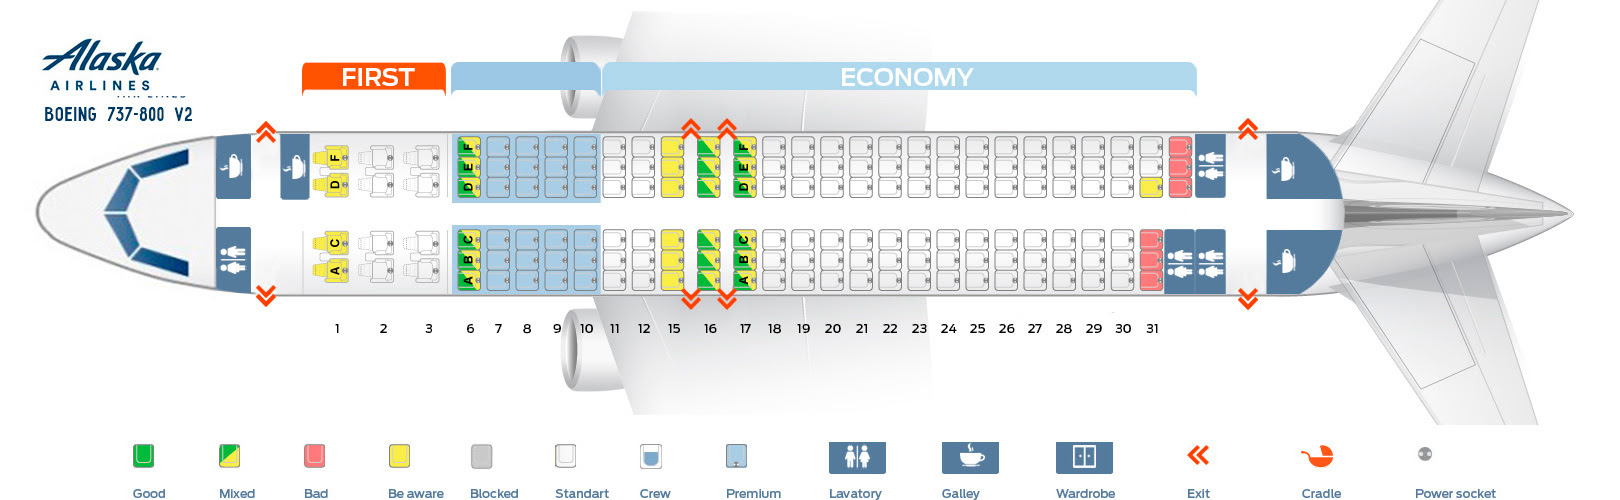 Alaska Airlines Seating Selection